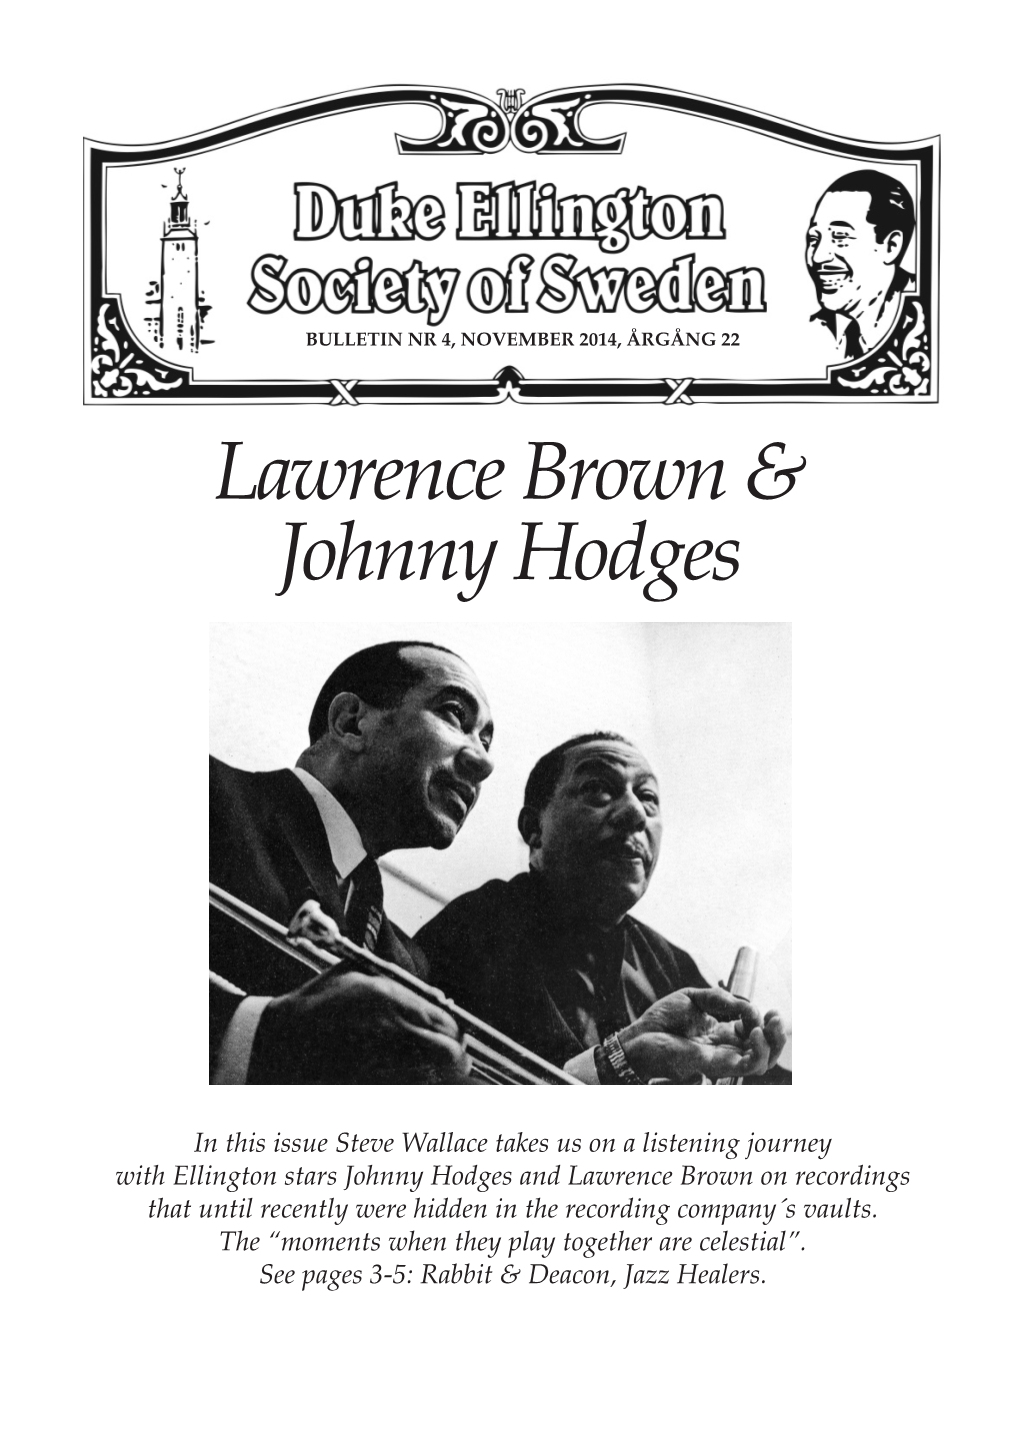 Lawrence Brown & Johnny Hodges